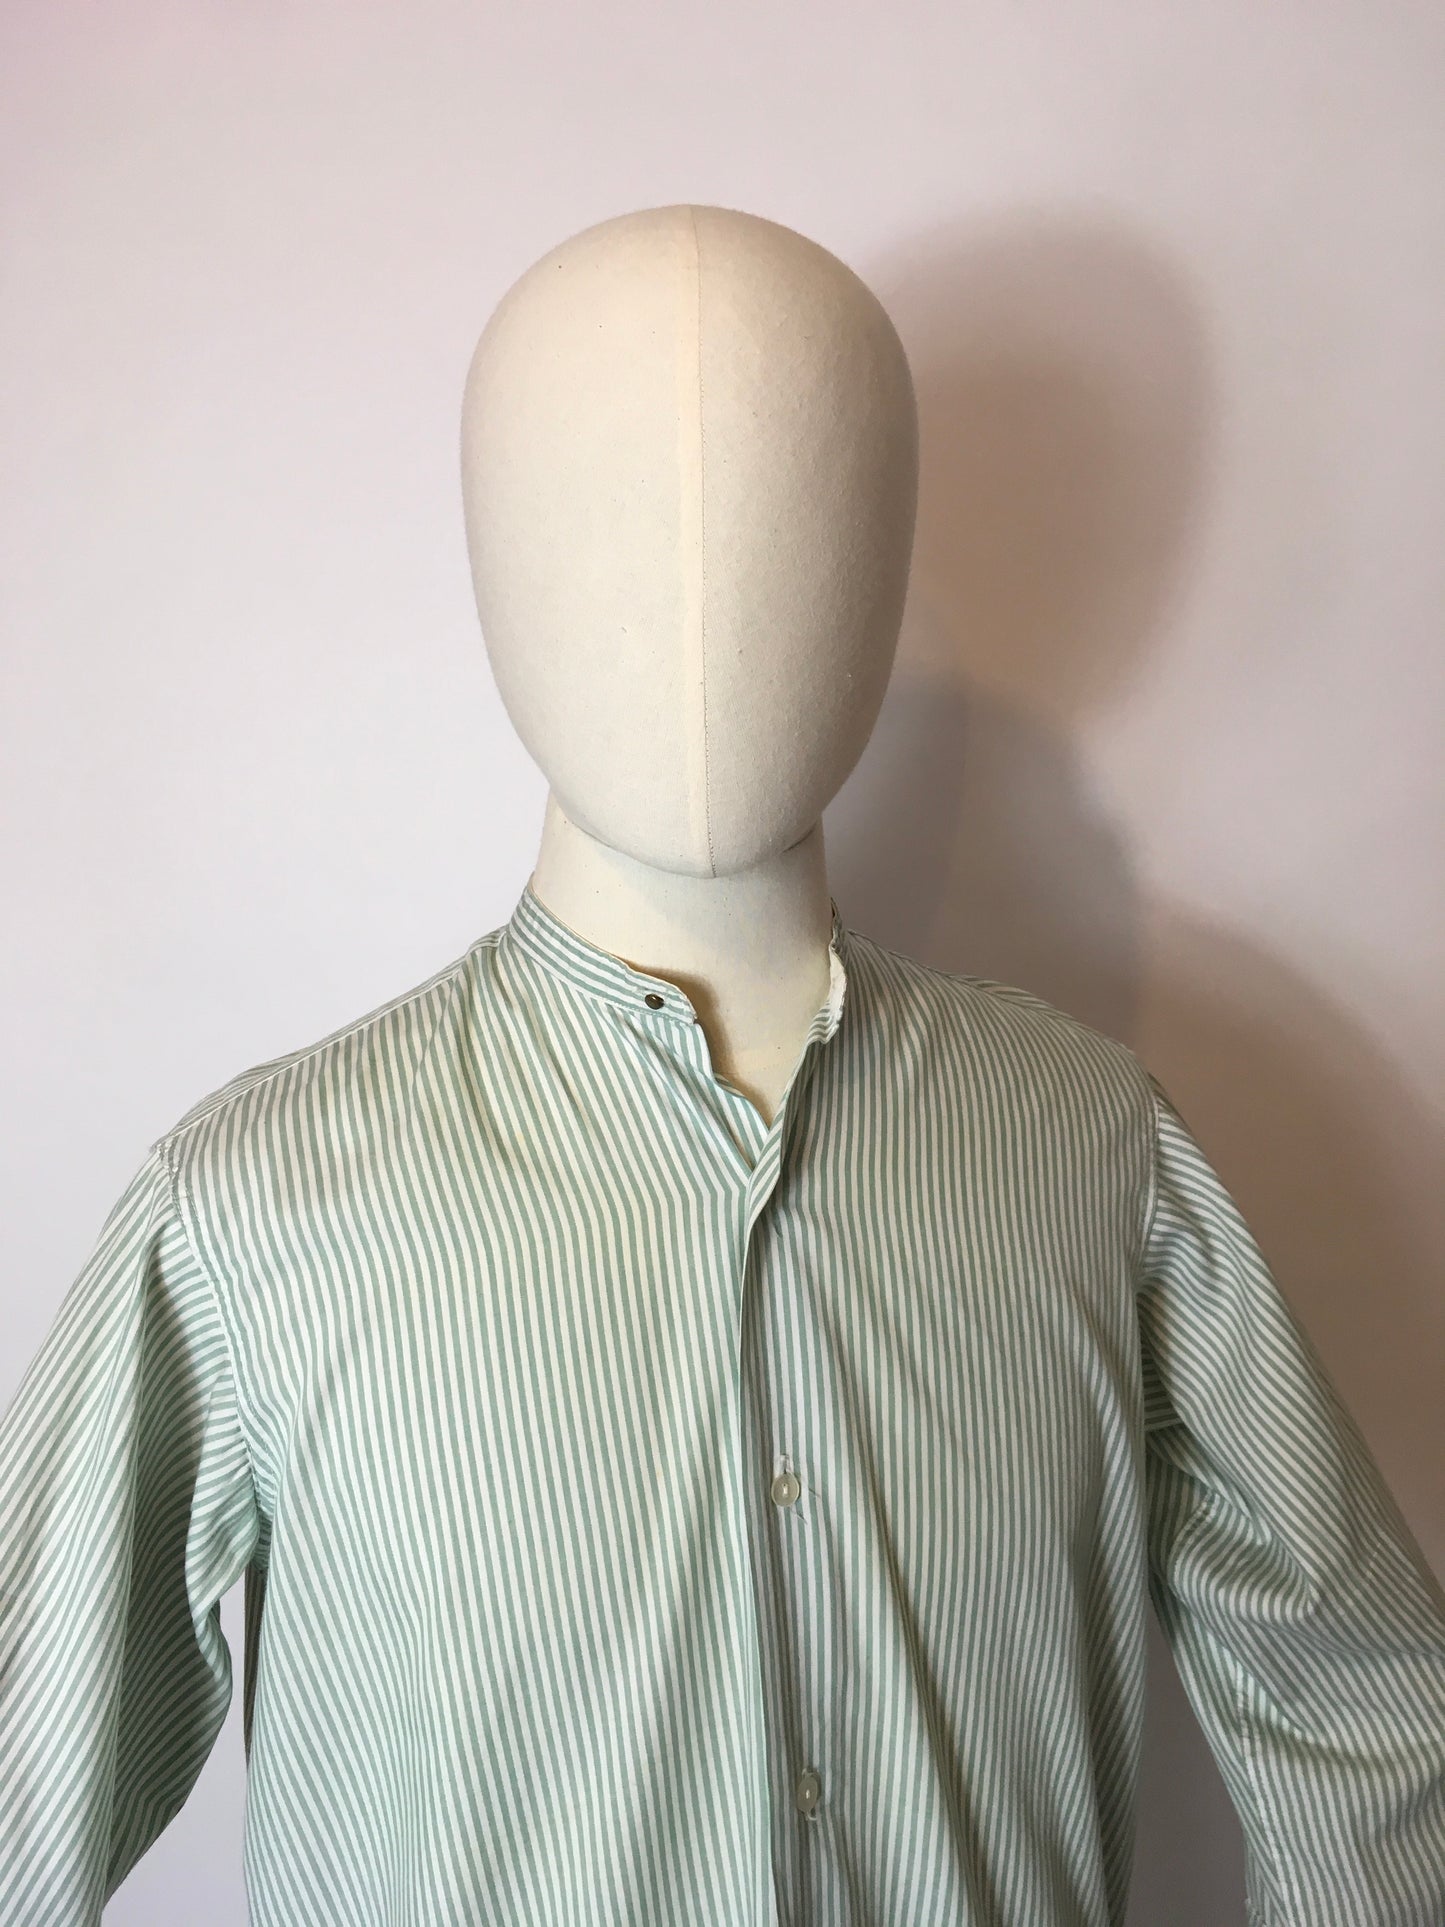 Original Gents Collarless Shirt with Double Cuff - In a Lovely Green and White Stripe